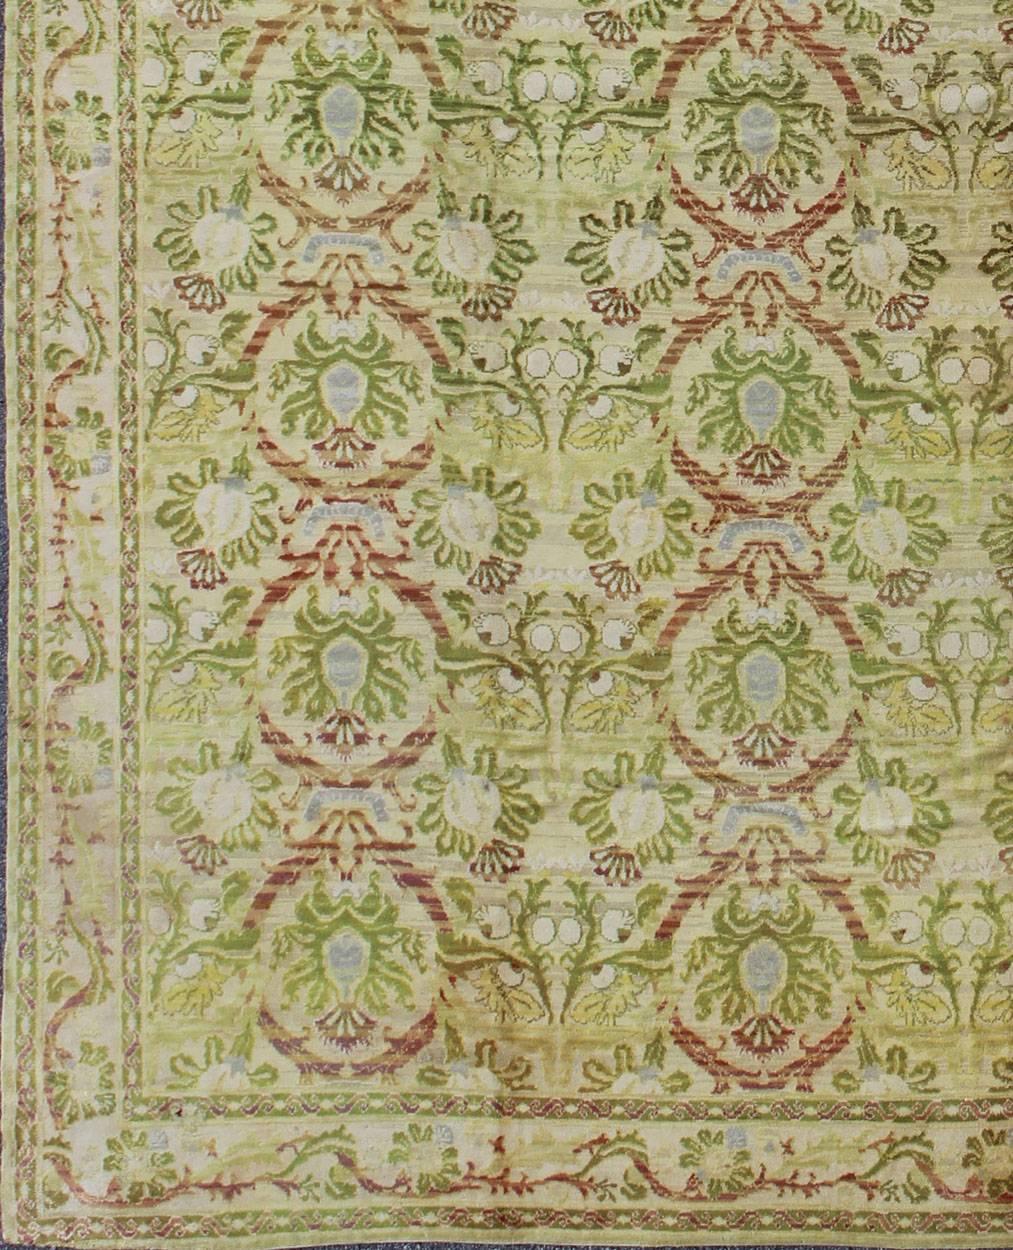 Antique Spanish rug with circular floral medallions in golden green and red, rug j10-0803, country of origin / type: Spain / Spanish Colonial, circa 1900

This elegant antique Spanish carpet is the proud heir to a long tradition of rug-weaving in